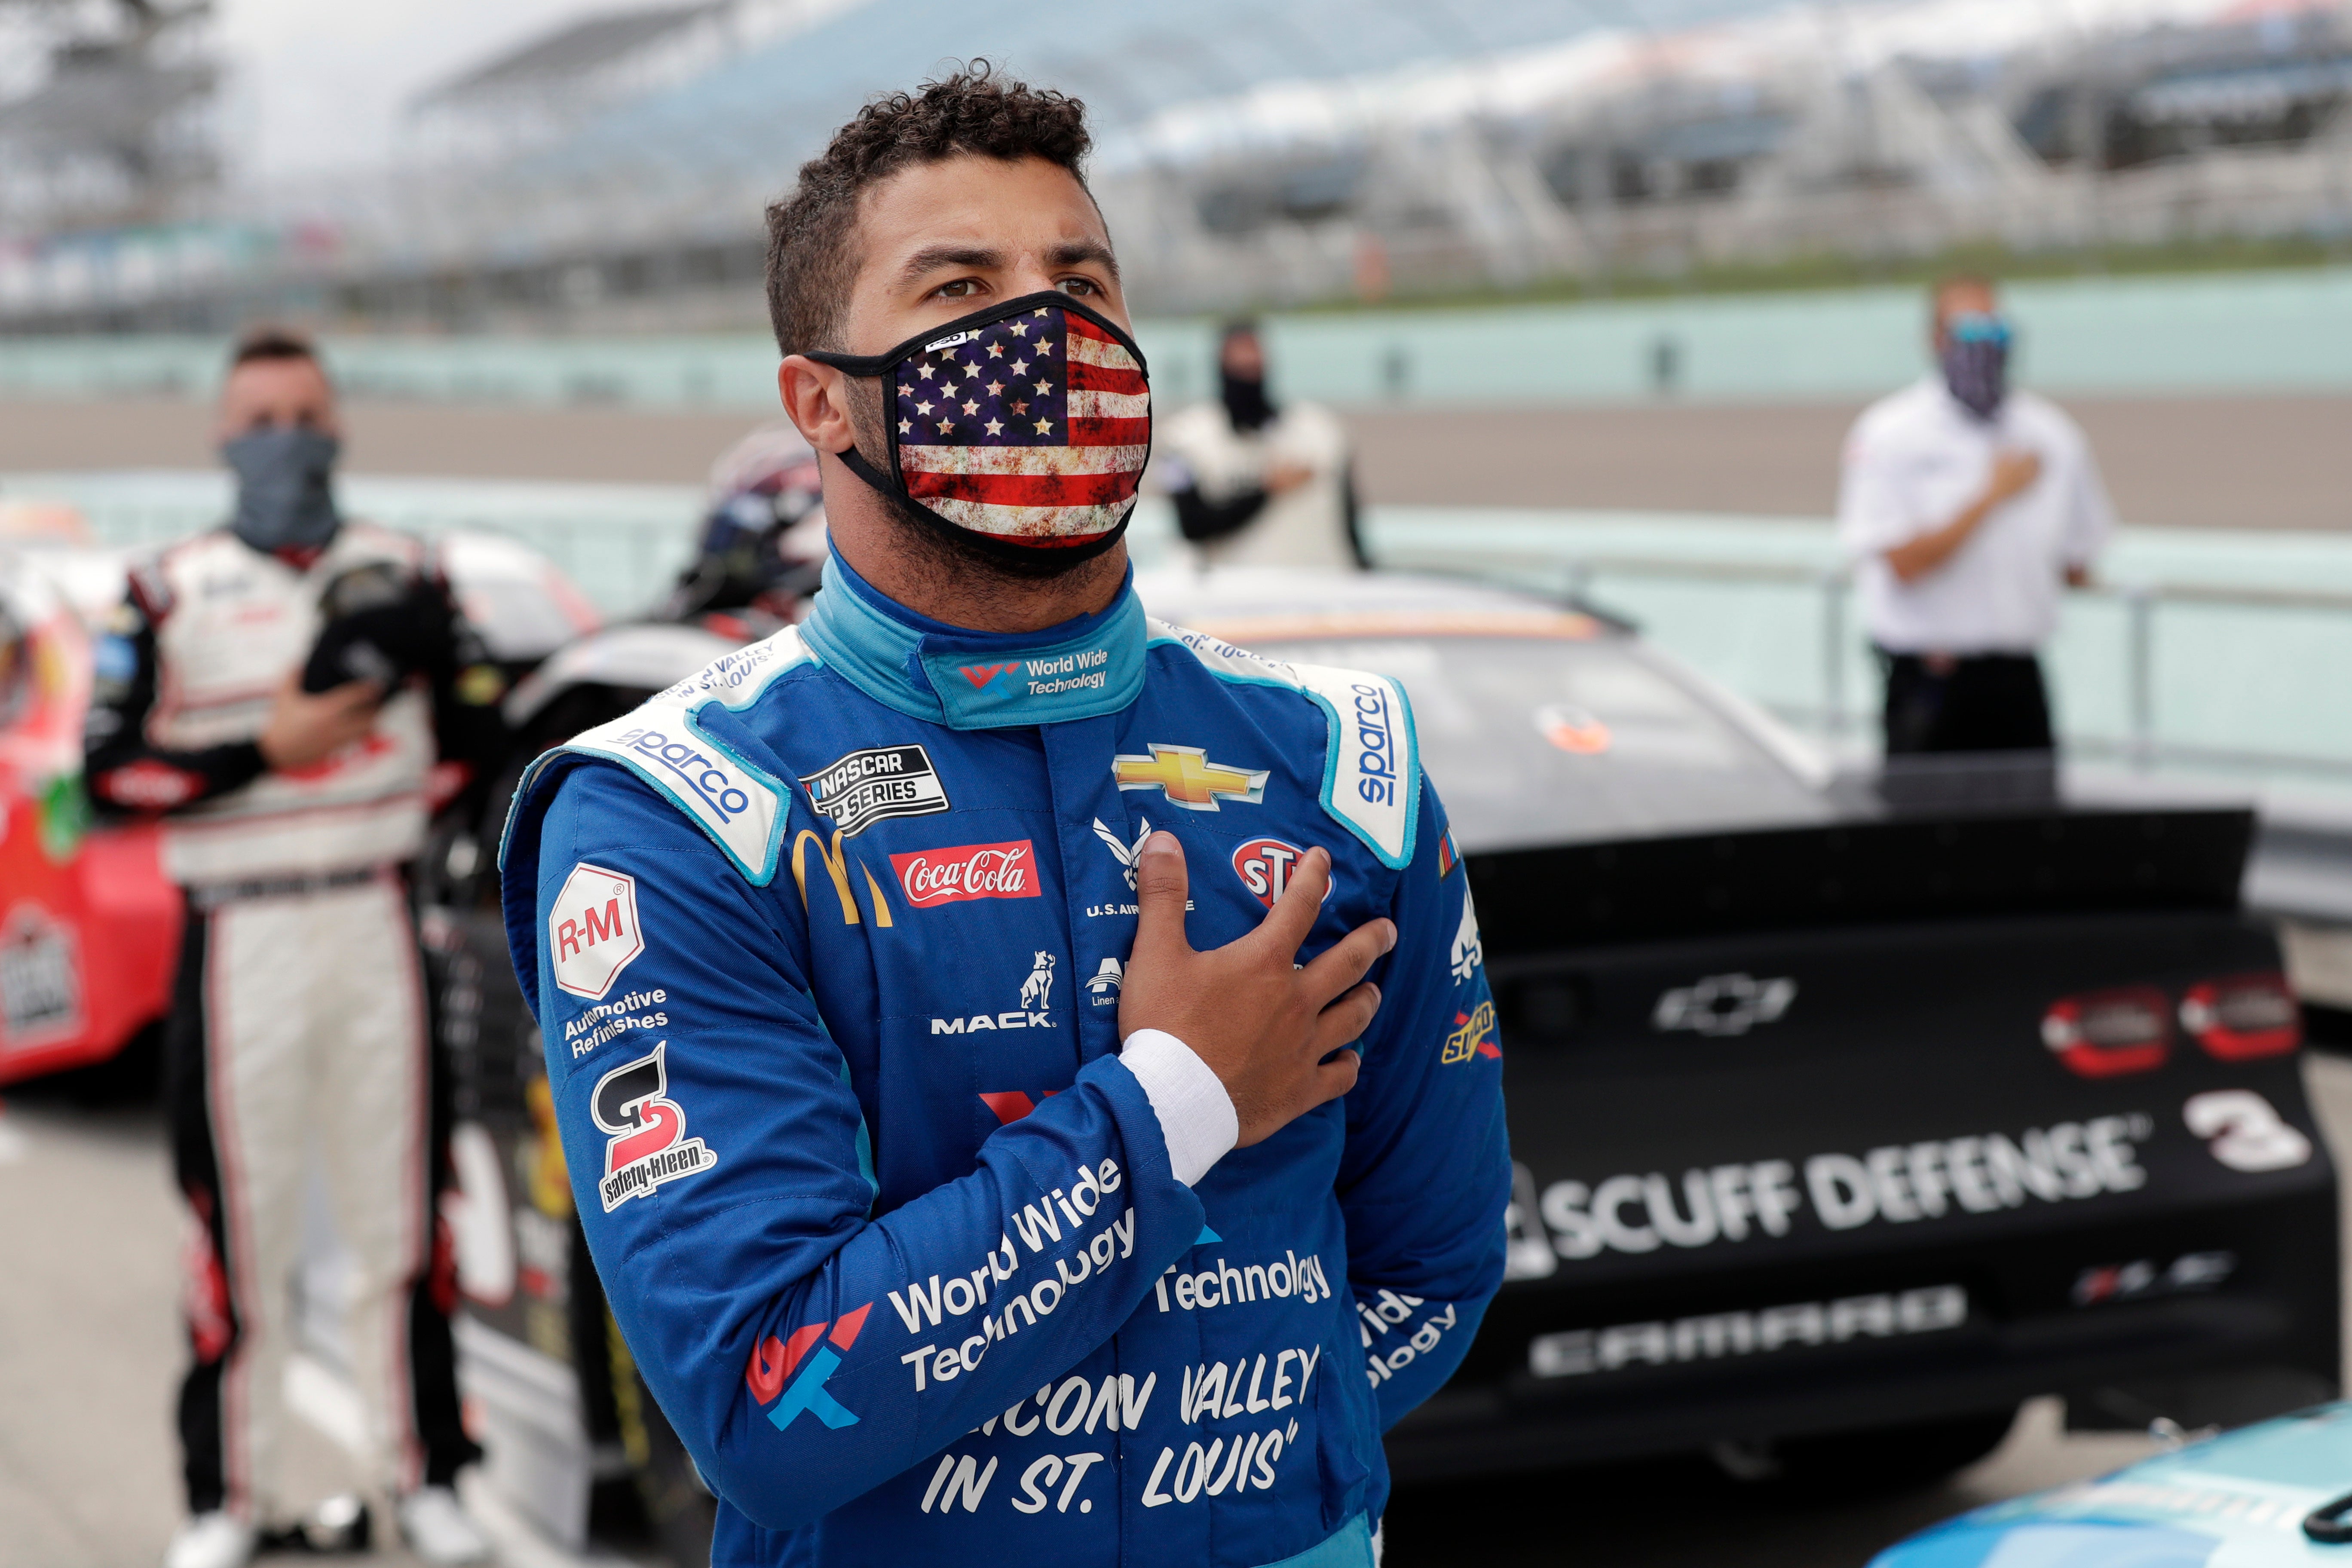 ESPN dragged for reviving debunked narrative Bubba Wallace found a 'noose' in NASCAR garage last year